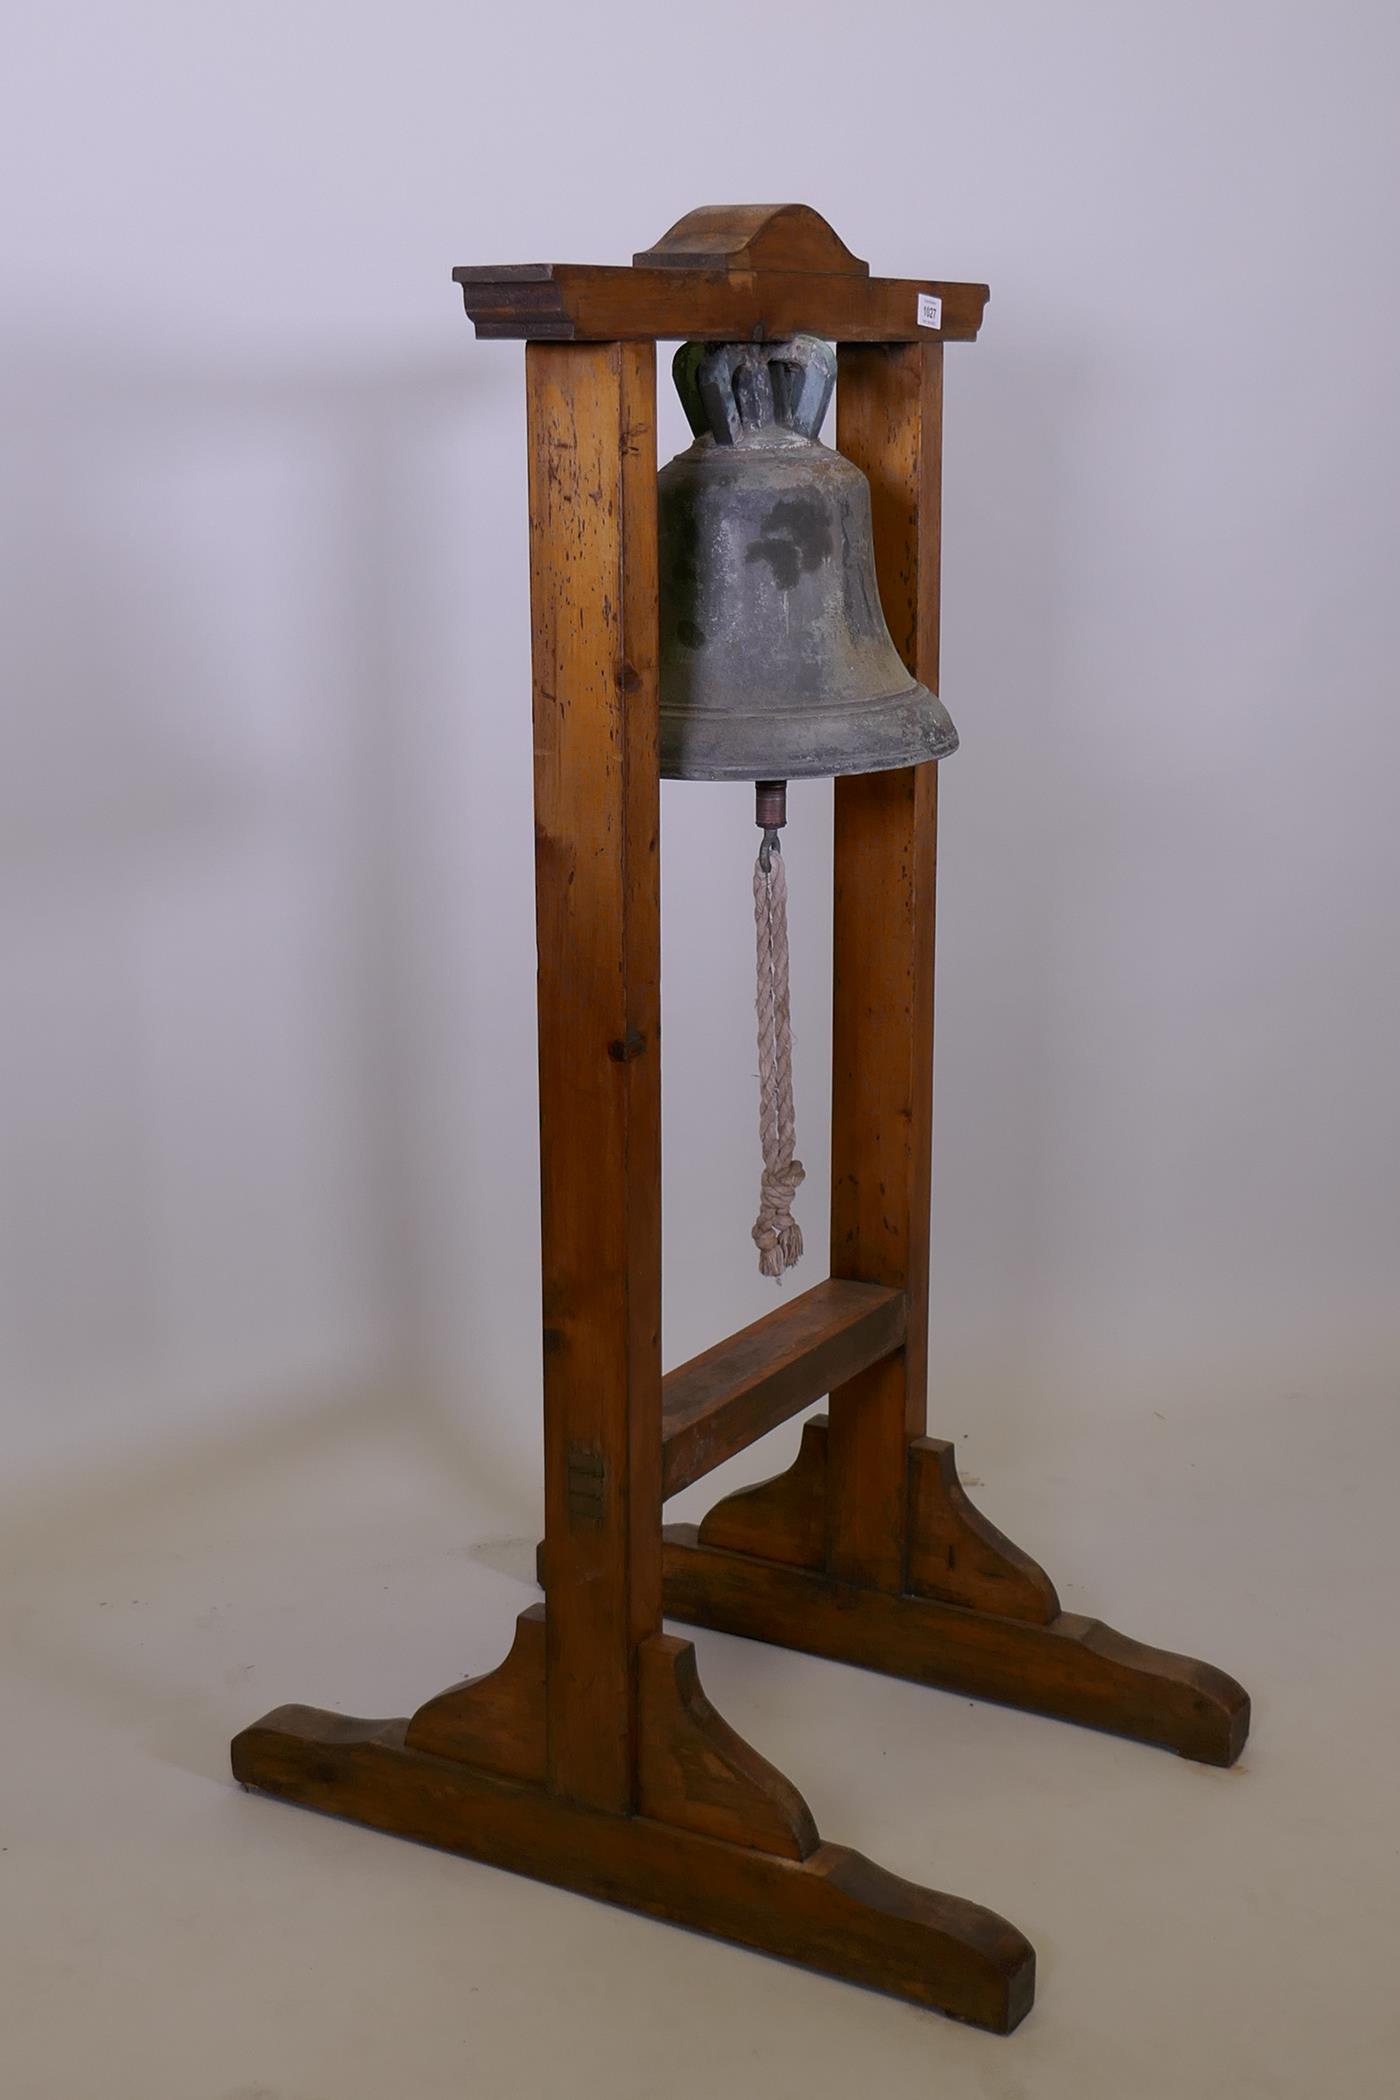 Antique bronze bell, mounted in a pine frame, 45" x 26" x 25" - Image 4 of 4